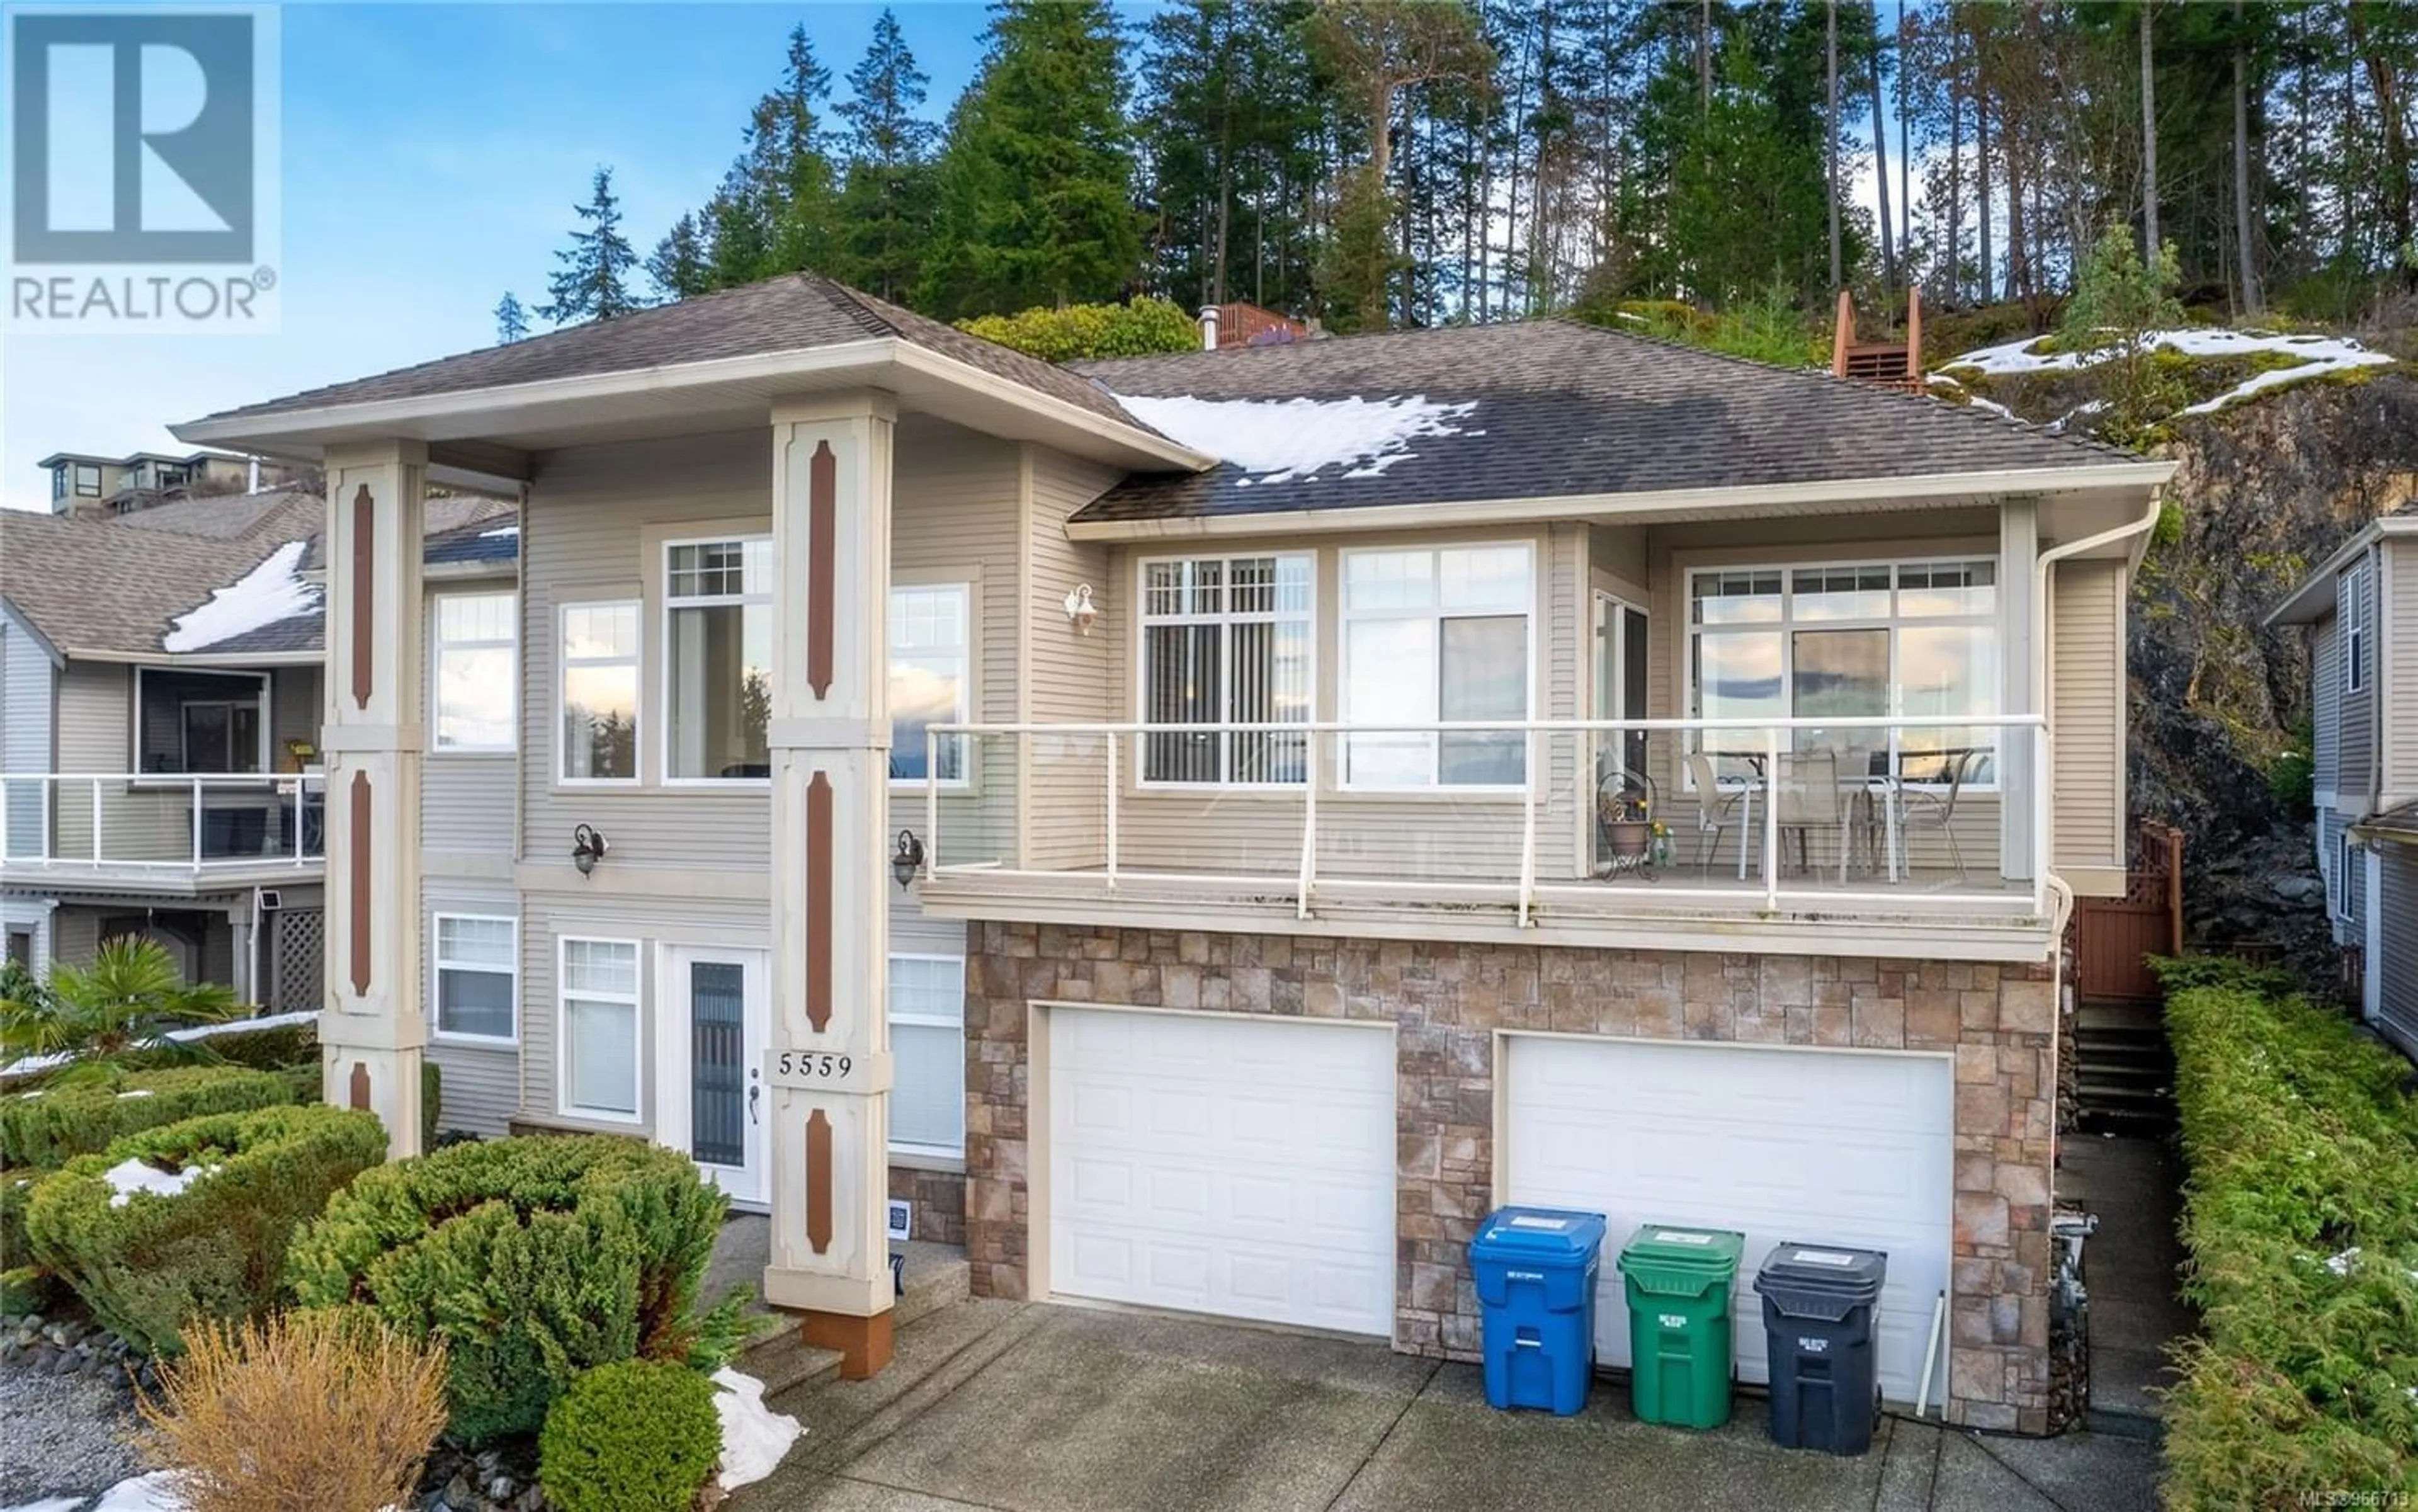 Frontside or backside of a home for 5559 Cliffside Rd, Nanaimo British Columbia V9T6R3